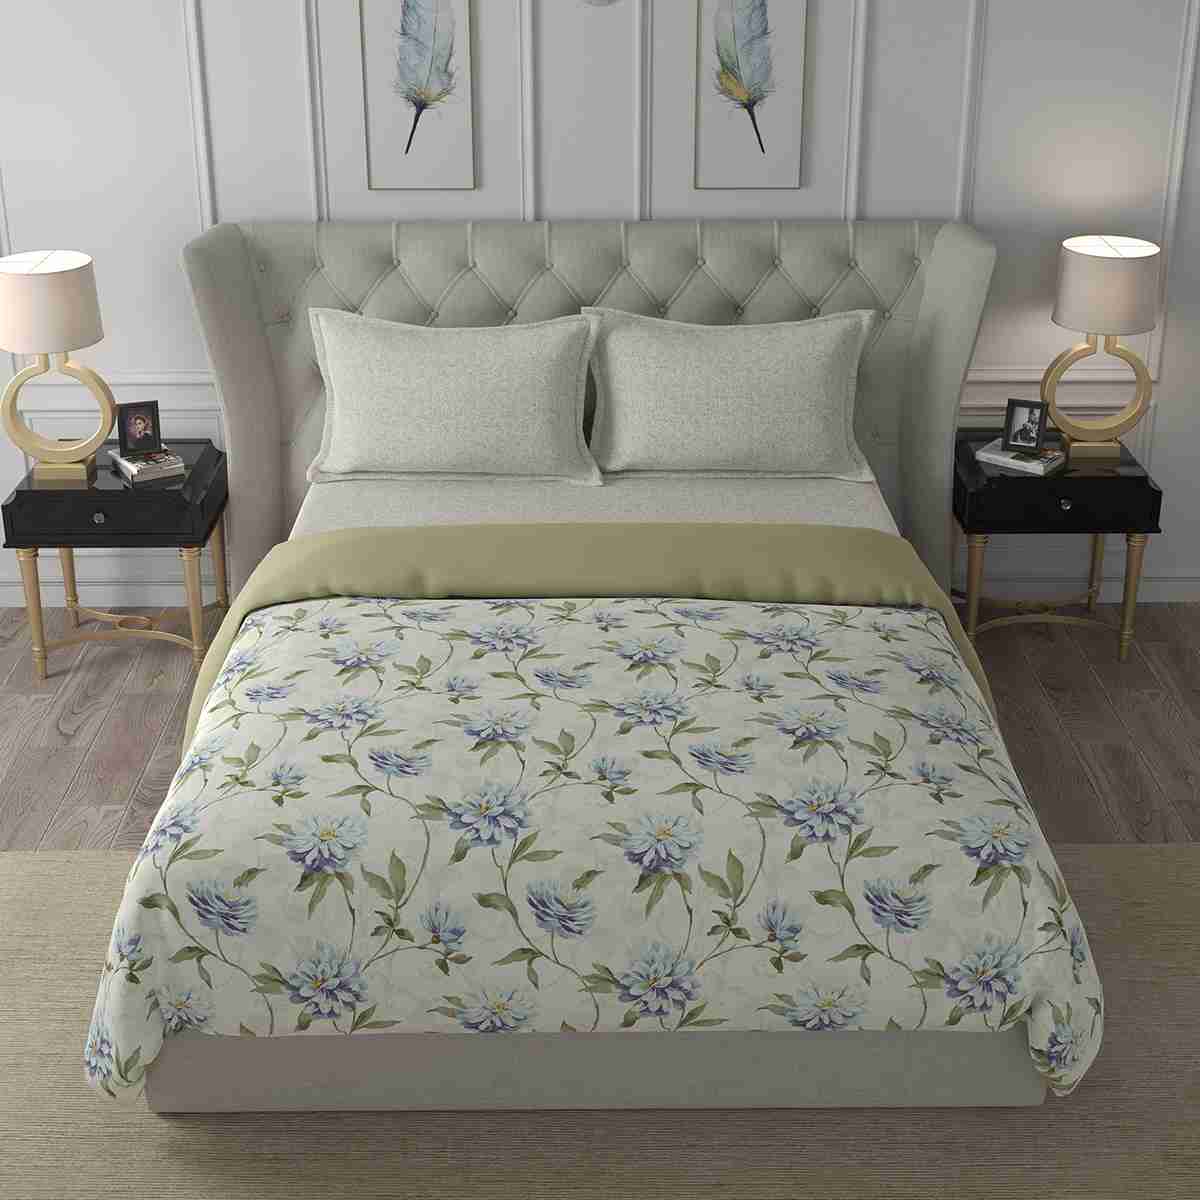 Regency Neveah Summer AC Quilt/Quilted Bed Cover/Comforter Blue